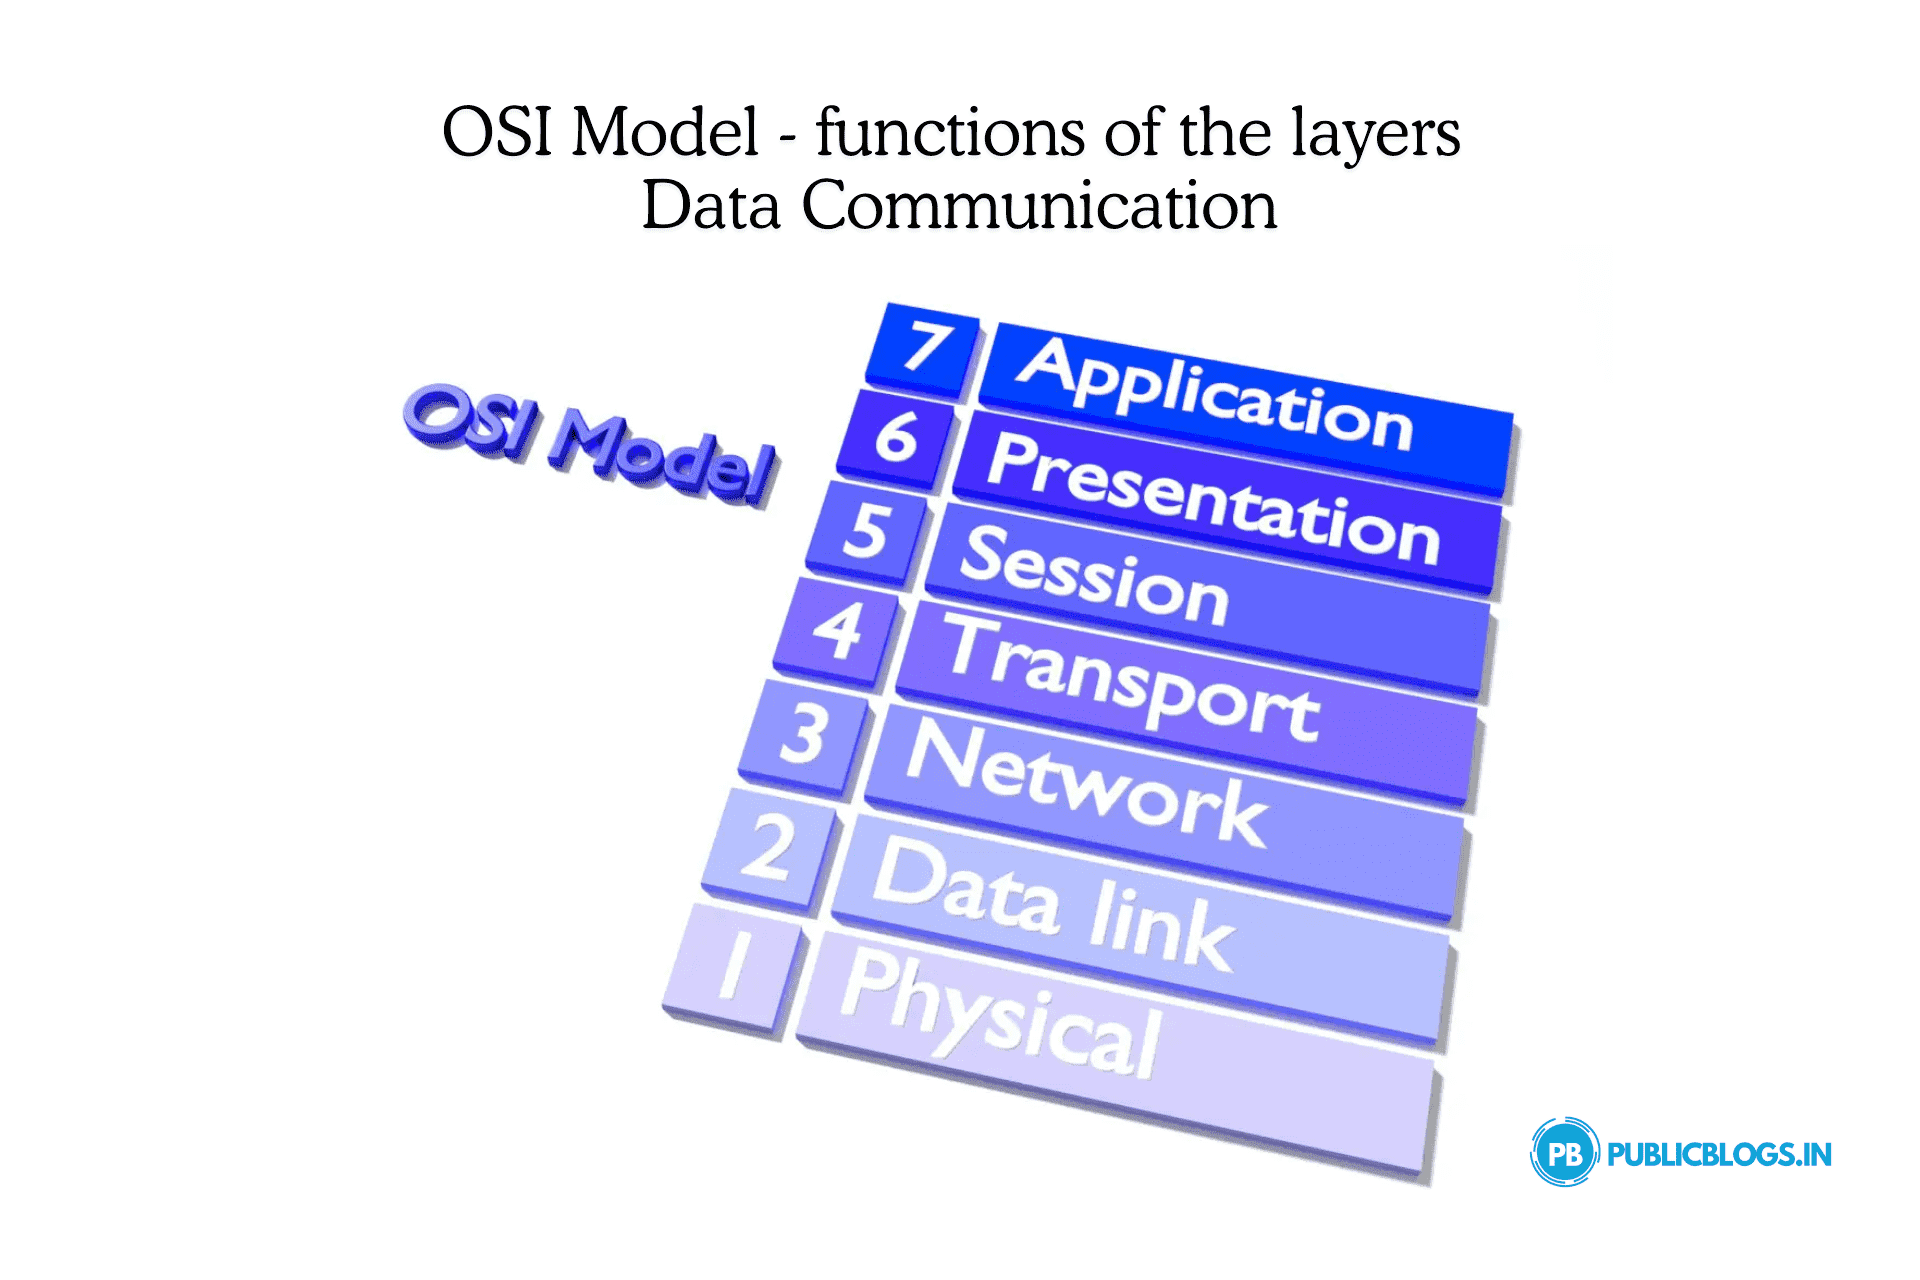 OSI Model - functions of the layers for Data Communication details